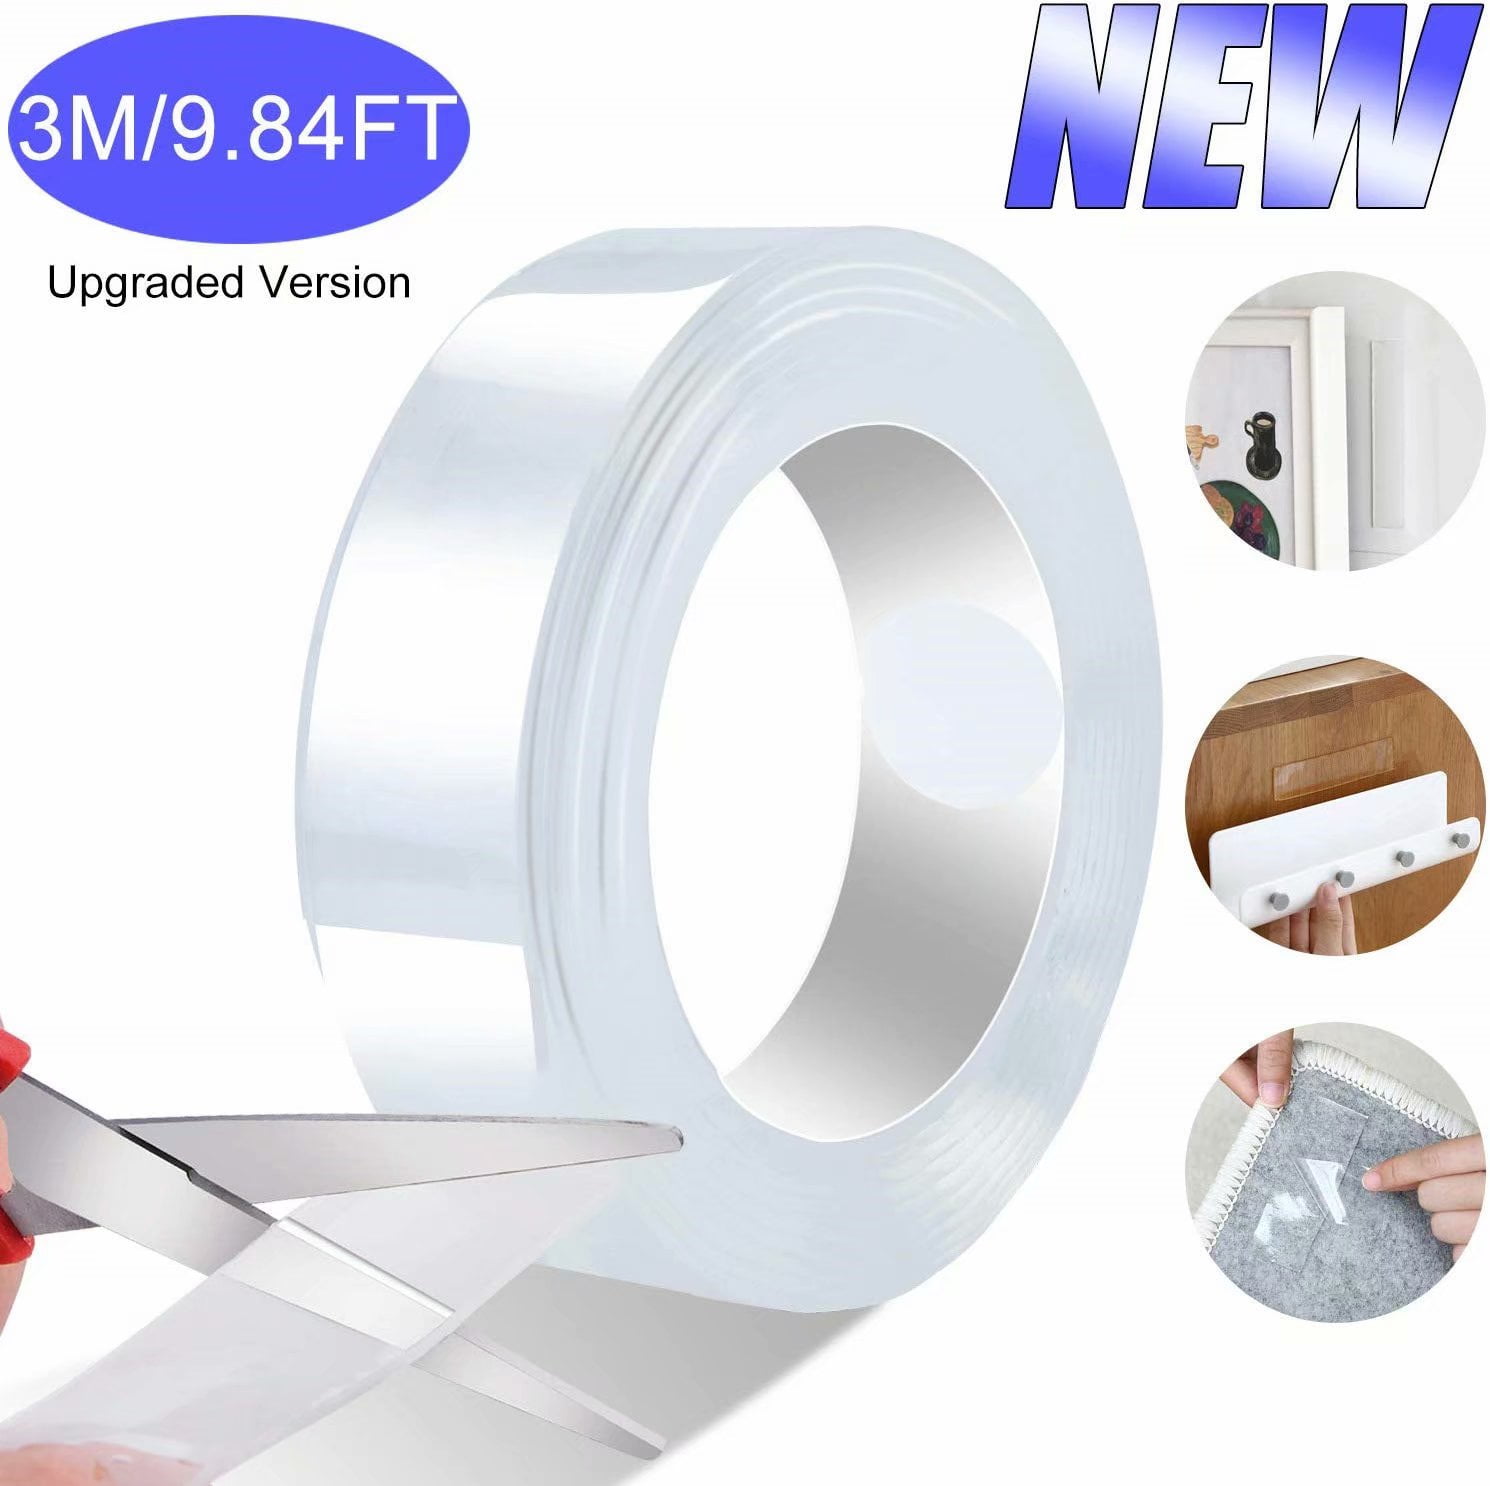 Nano Double Sided Poster tape Heavy Duty Multipurpose Hanging Adhesive  strips Strong Sticky Mounting tape Picture Gel tape (Transparent 9.84FT)  9.84FT Transparent